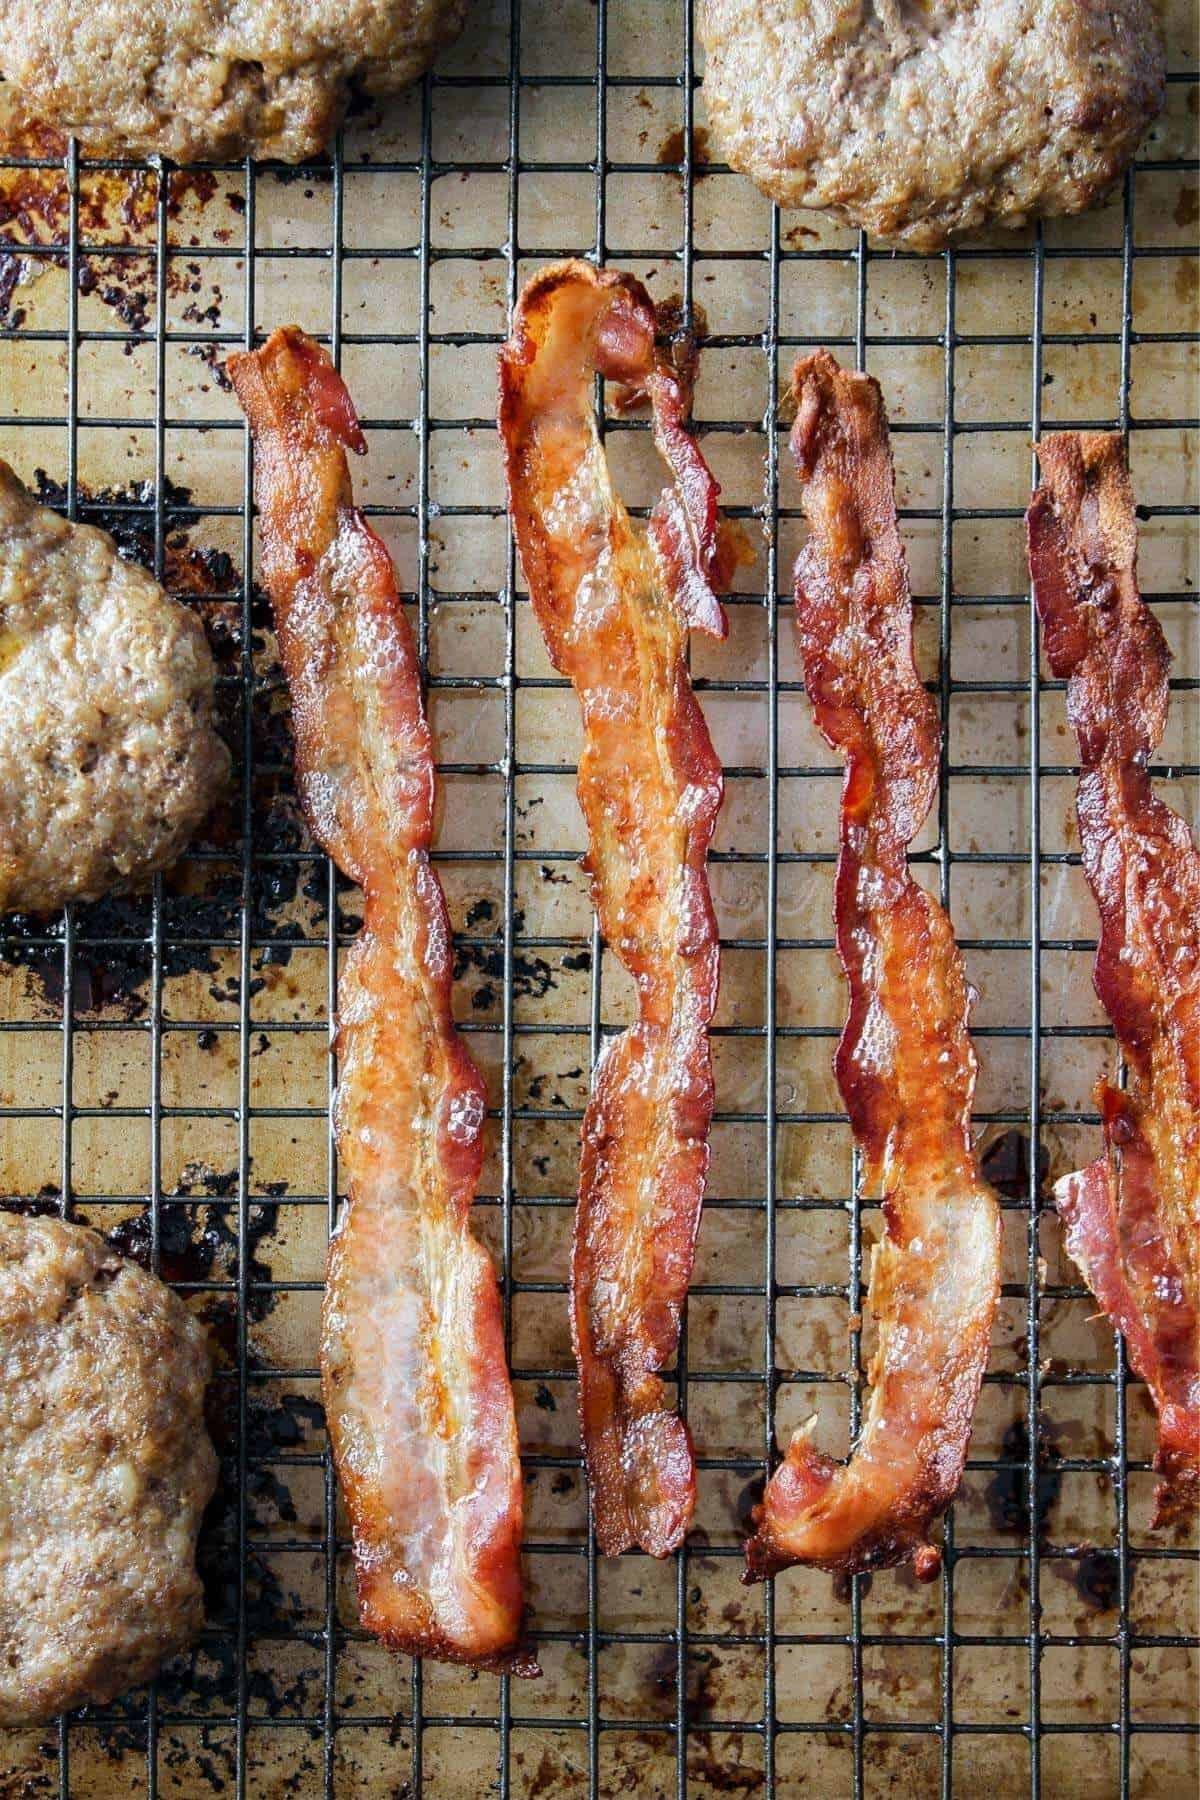 Sausage patties and bacon on a wire cooling rack.